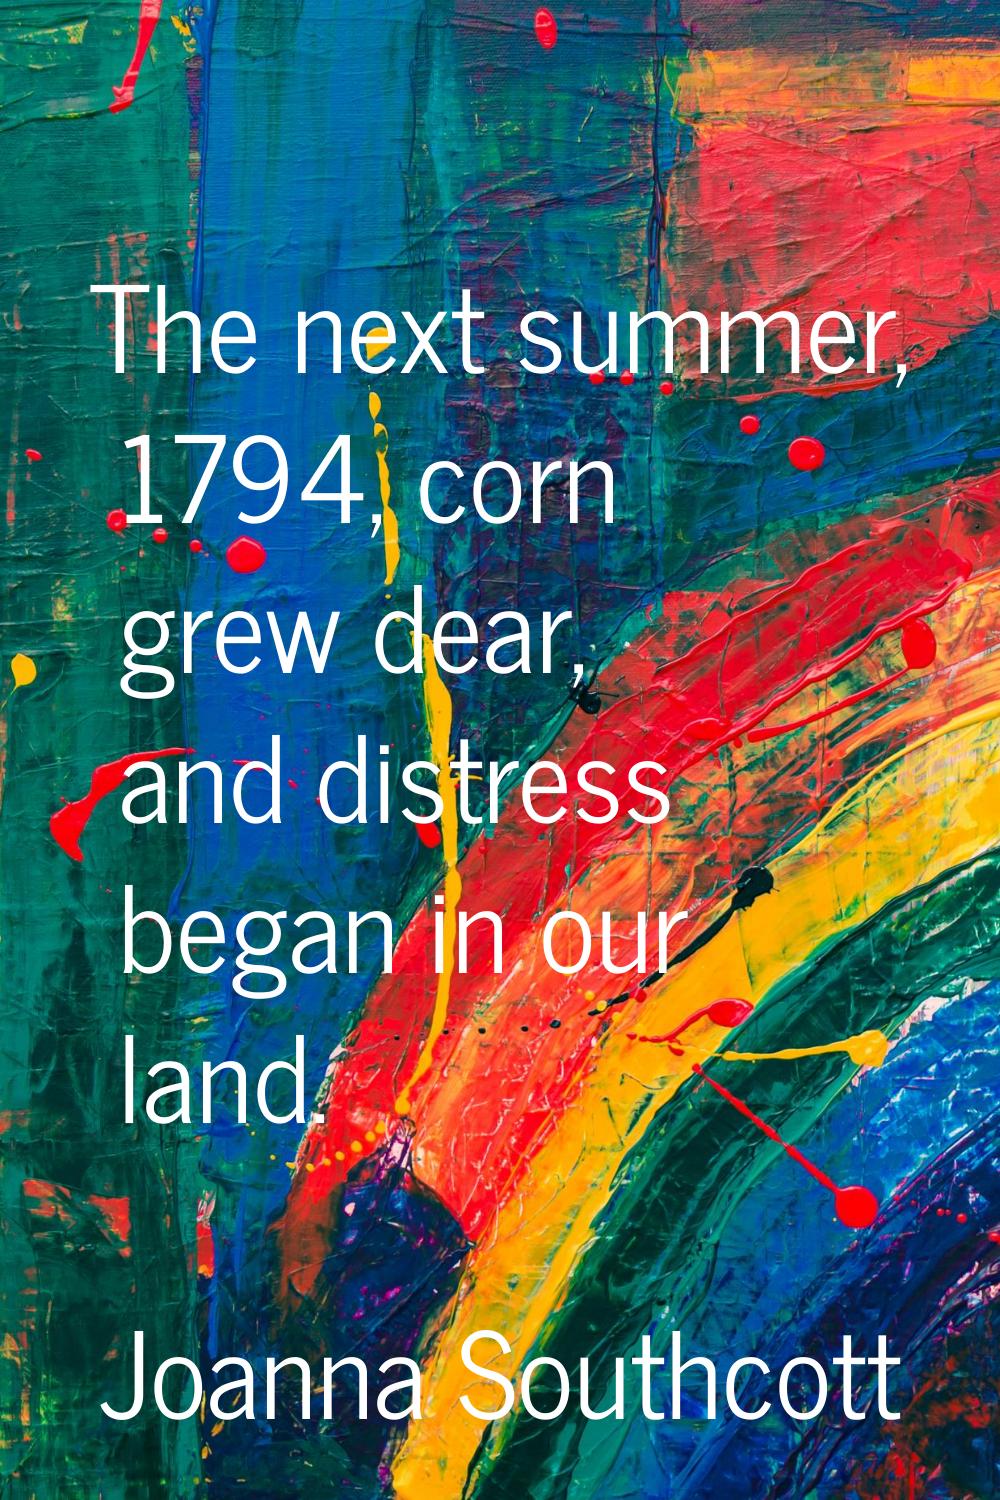 The next summer, 1794, corn grew dear, and distress began in our land.